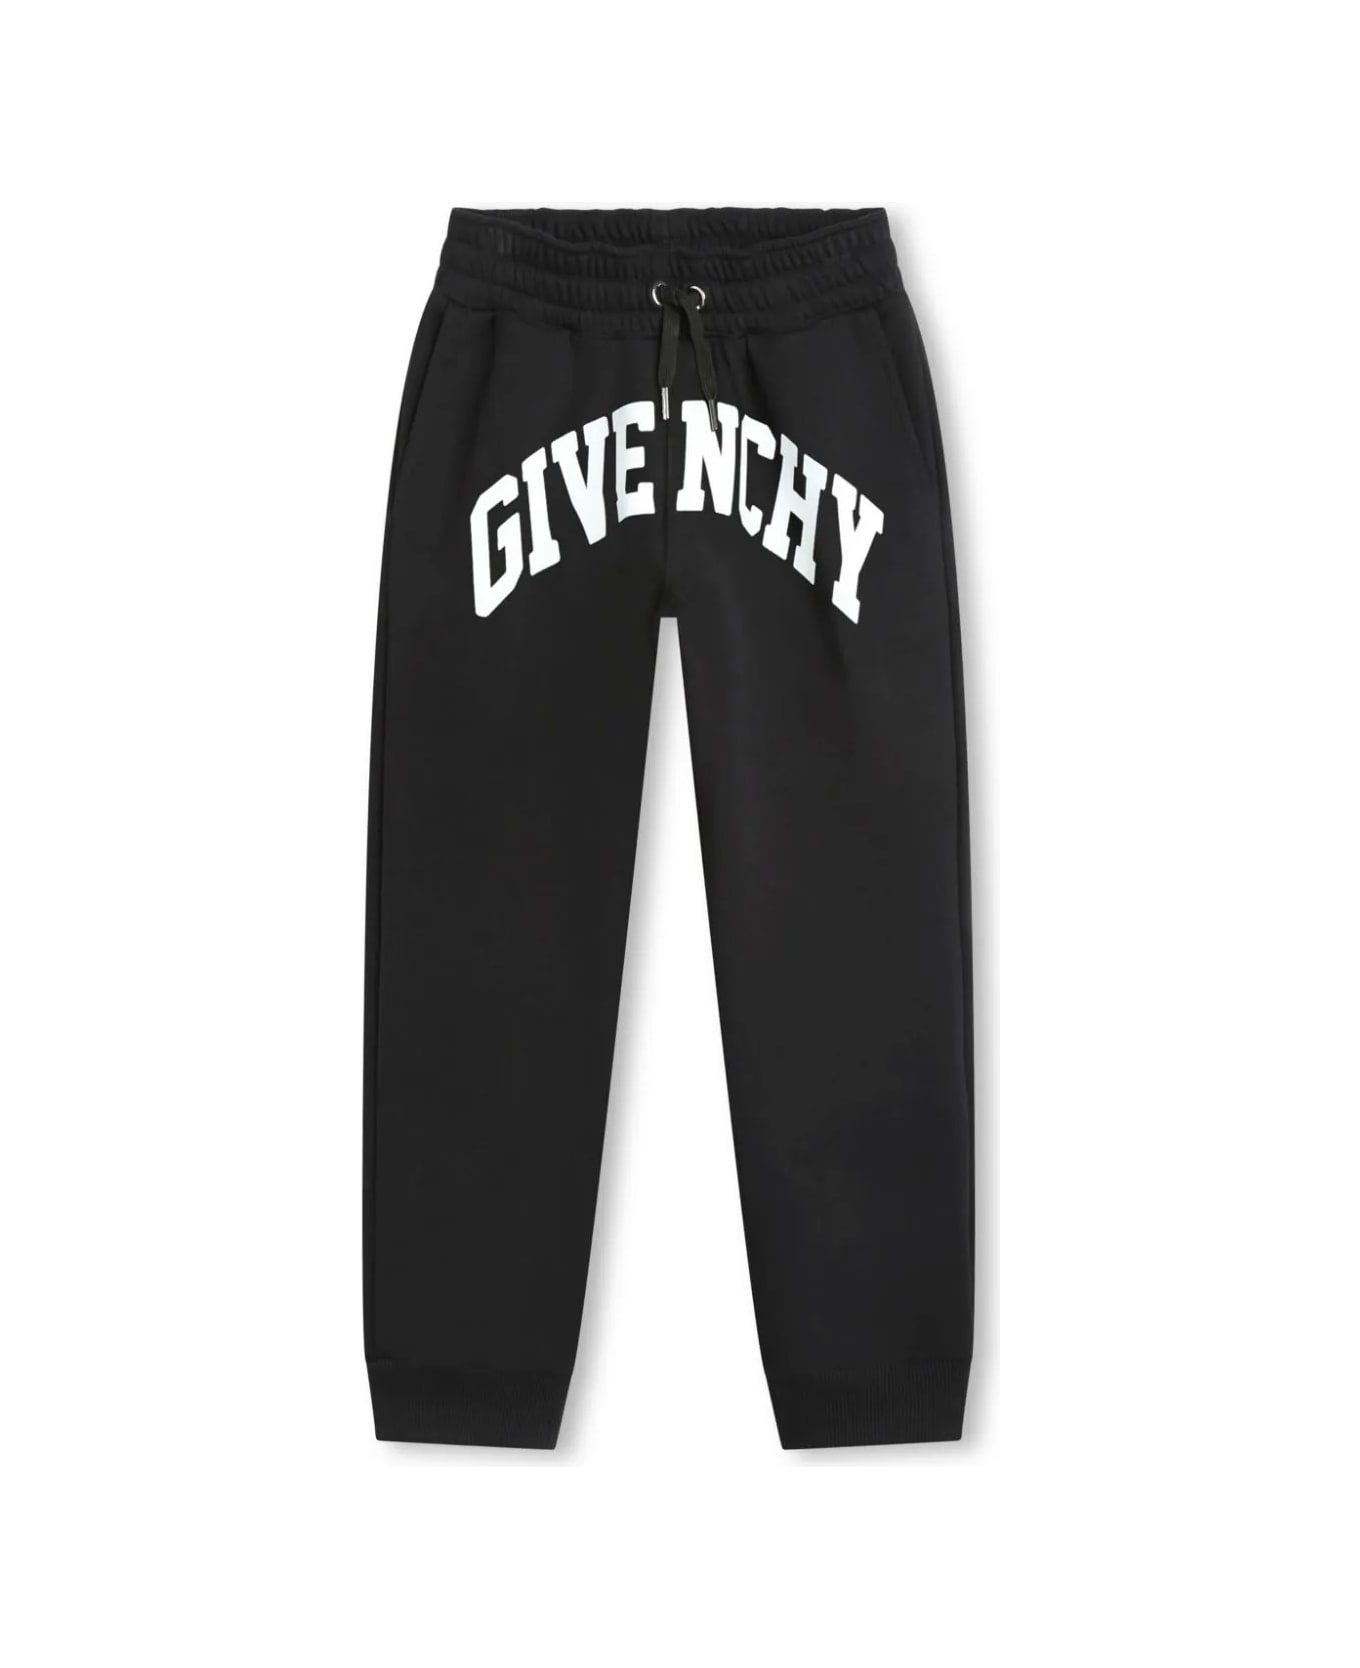 Givenchy Black Joggers With Arched Logo - Nero